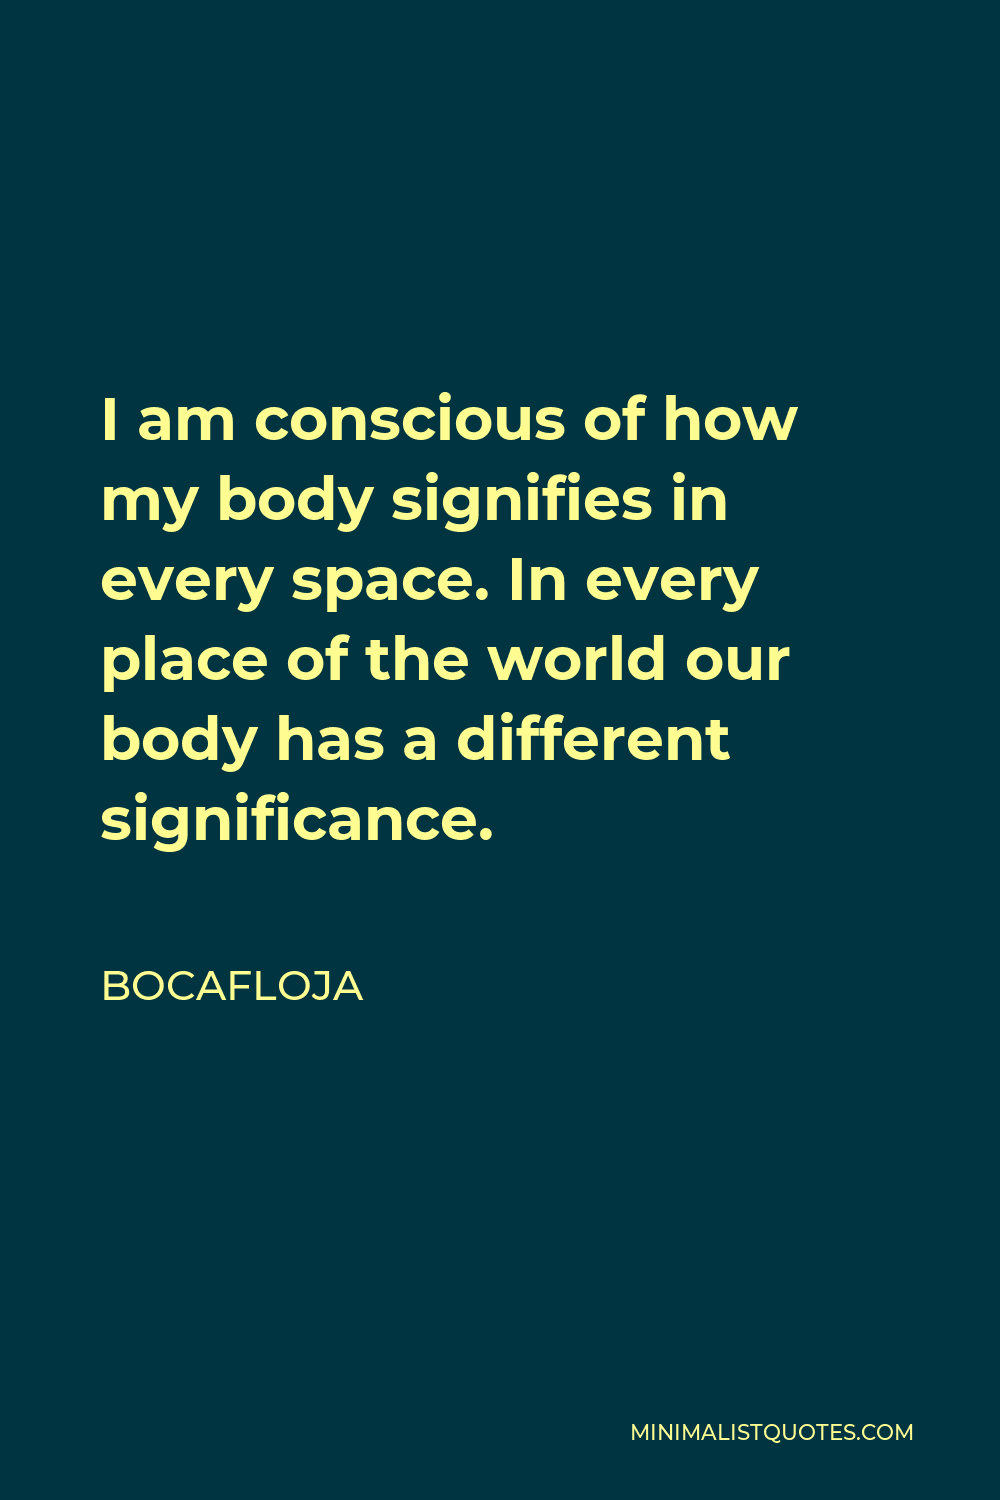 Bocafloja Quote - I am conscious of how my body signifies in every space. In every place of the world our body has a different significance.